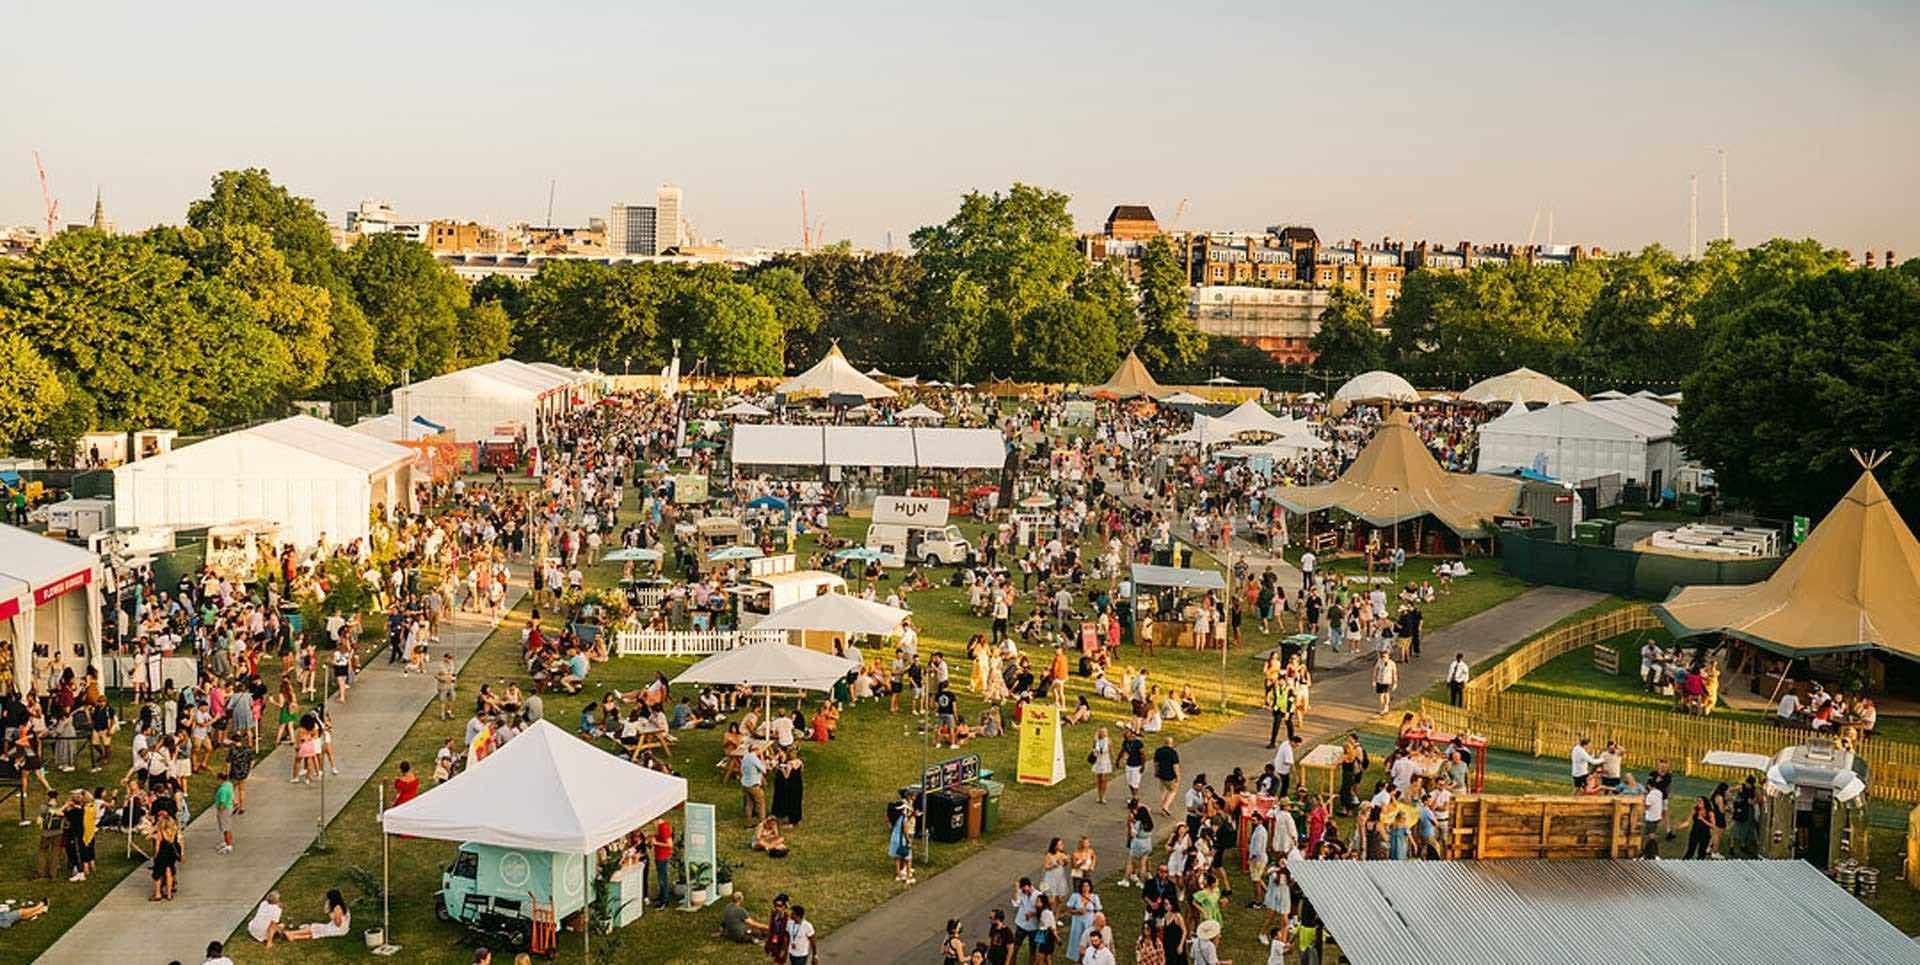 Taste of London promises an epic celebration for its 20th anniversary 